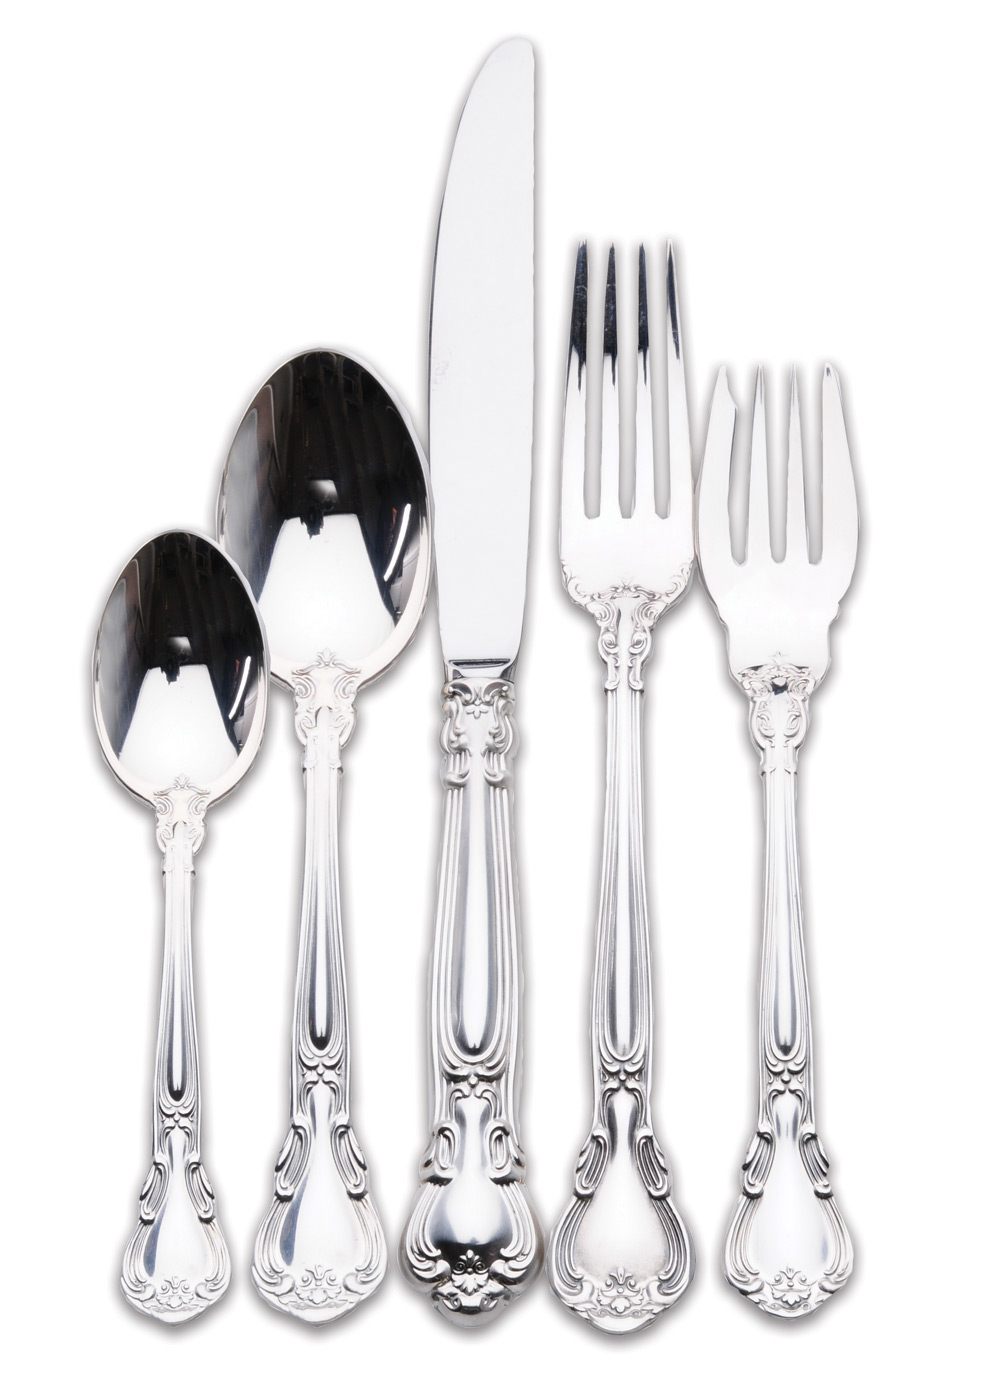 Details about   Gorham Sterling Silver Chantilly 6 Piece Place Size Setting No Monogram 